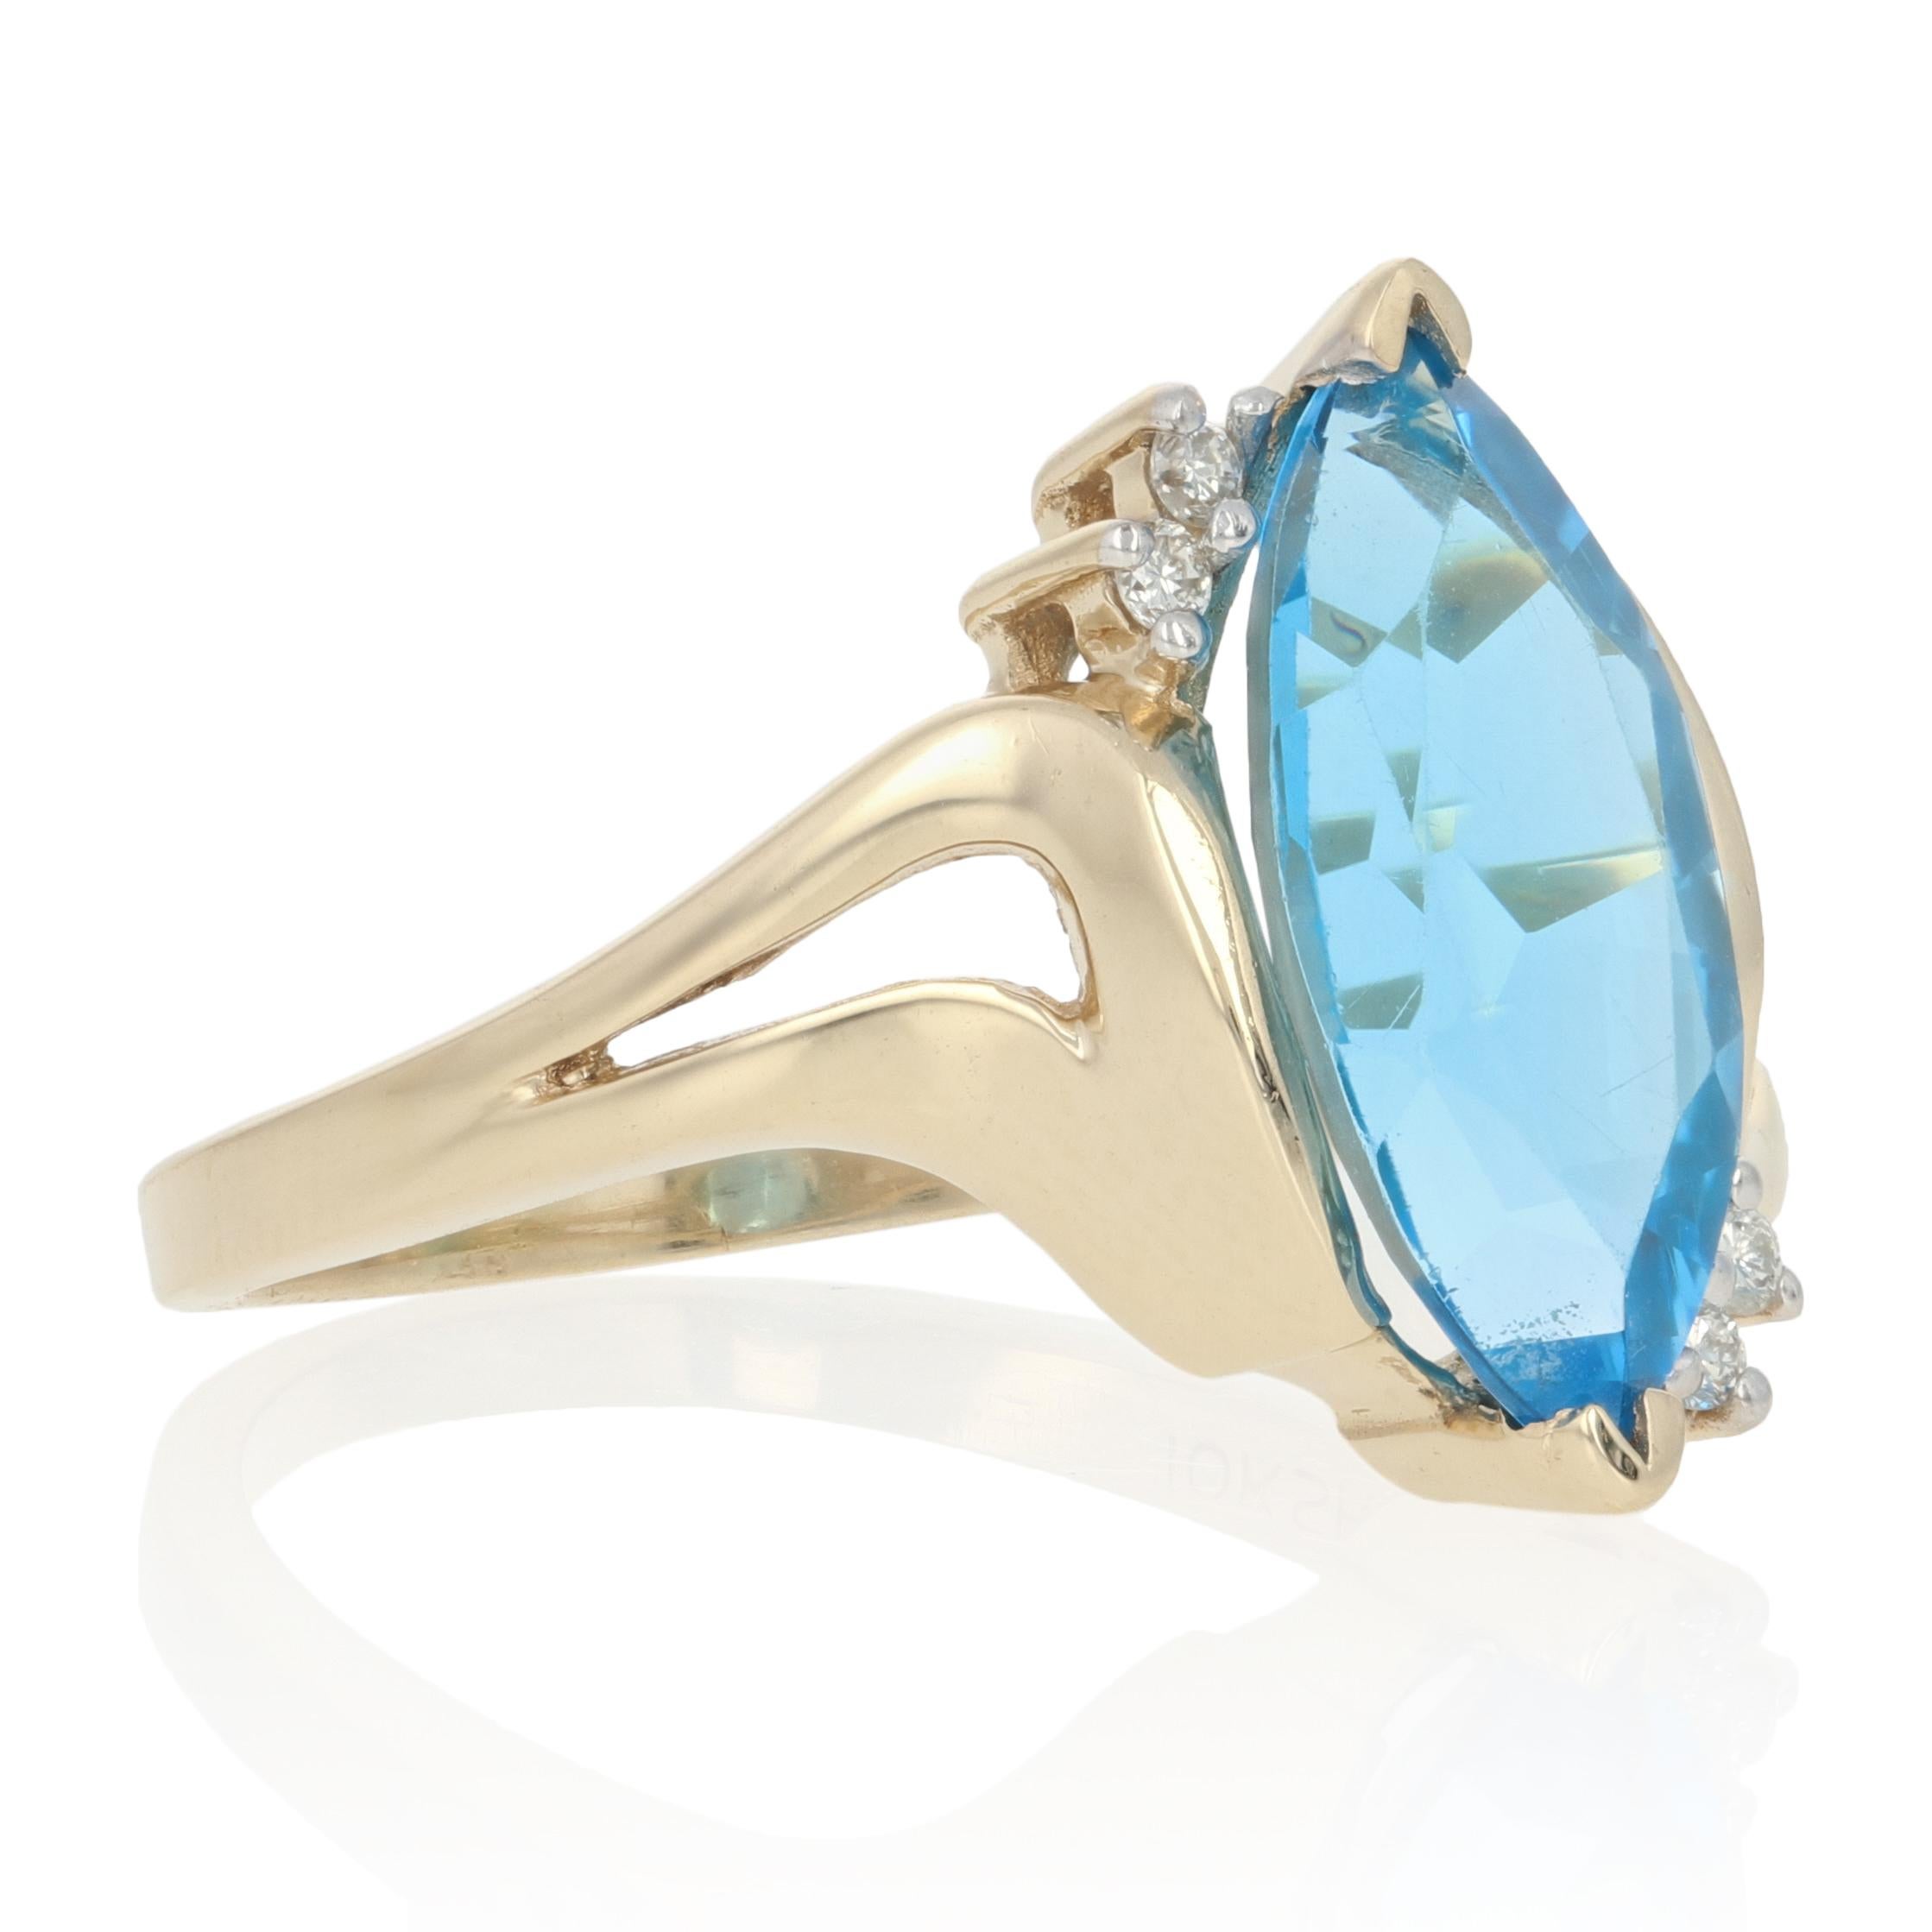 Size: 8 1/4
Sizing Fee: Down 2 sizes for $20 or Up 2 sizes for $25

Metal Content: Guaranteed 10k Gold as stamped (yellow and white)

Stone Information: 
Genuine Topaz
Treatment: Routinely Enhanced
Color: Blue
Cut: Marquise
Carat(s): 3.40ct

Natural